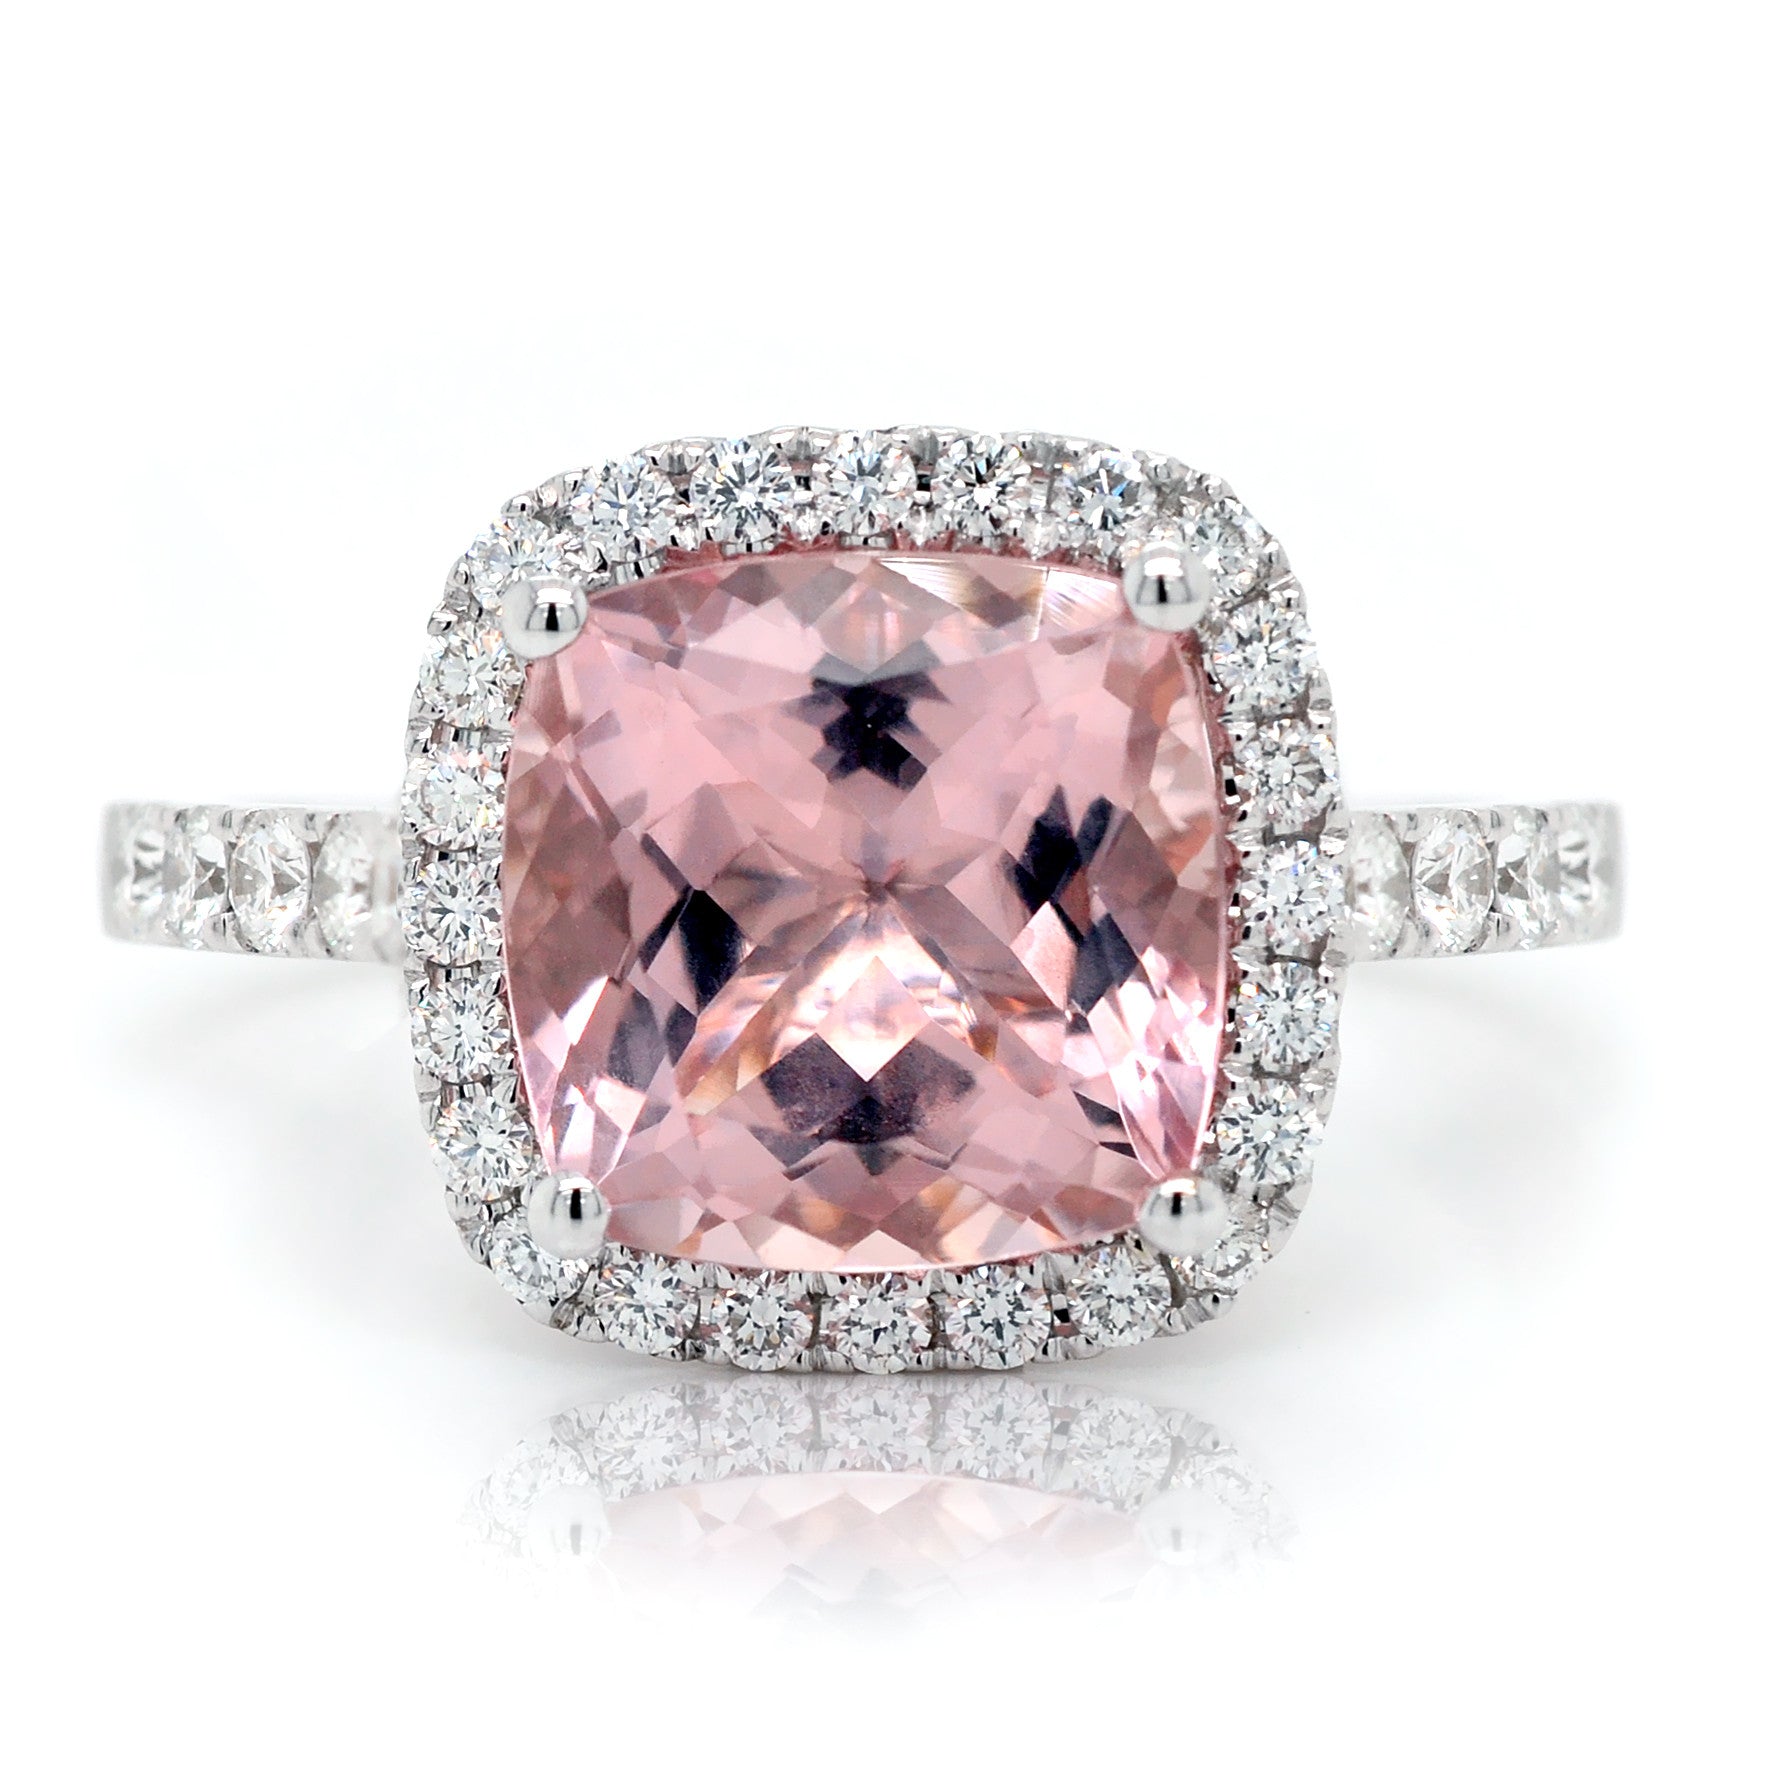 Pink Cushion Cut Morganite Ring with a Halo of Diamonds - ForeverJewels Design Studio 8